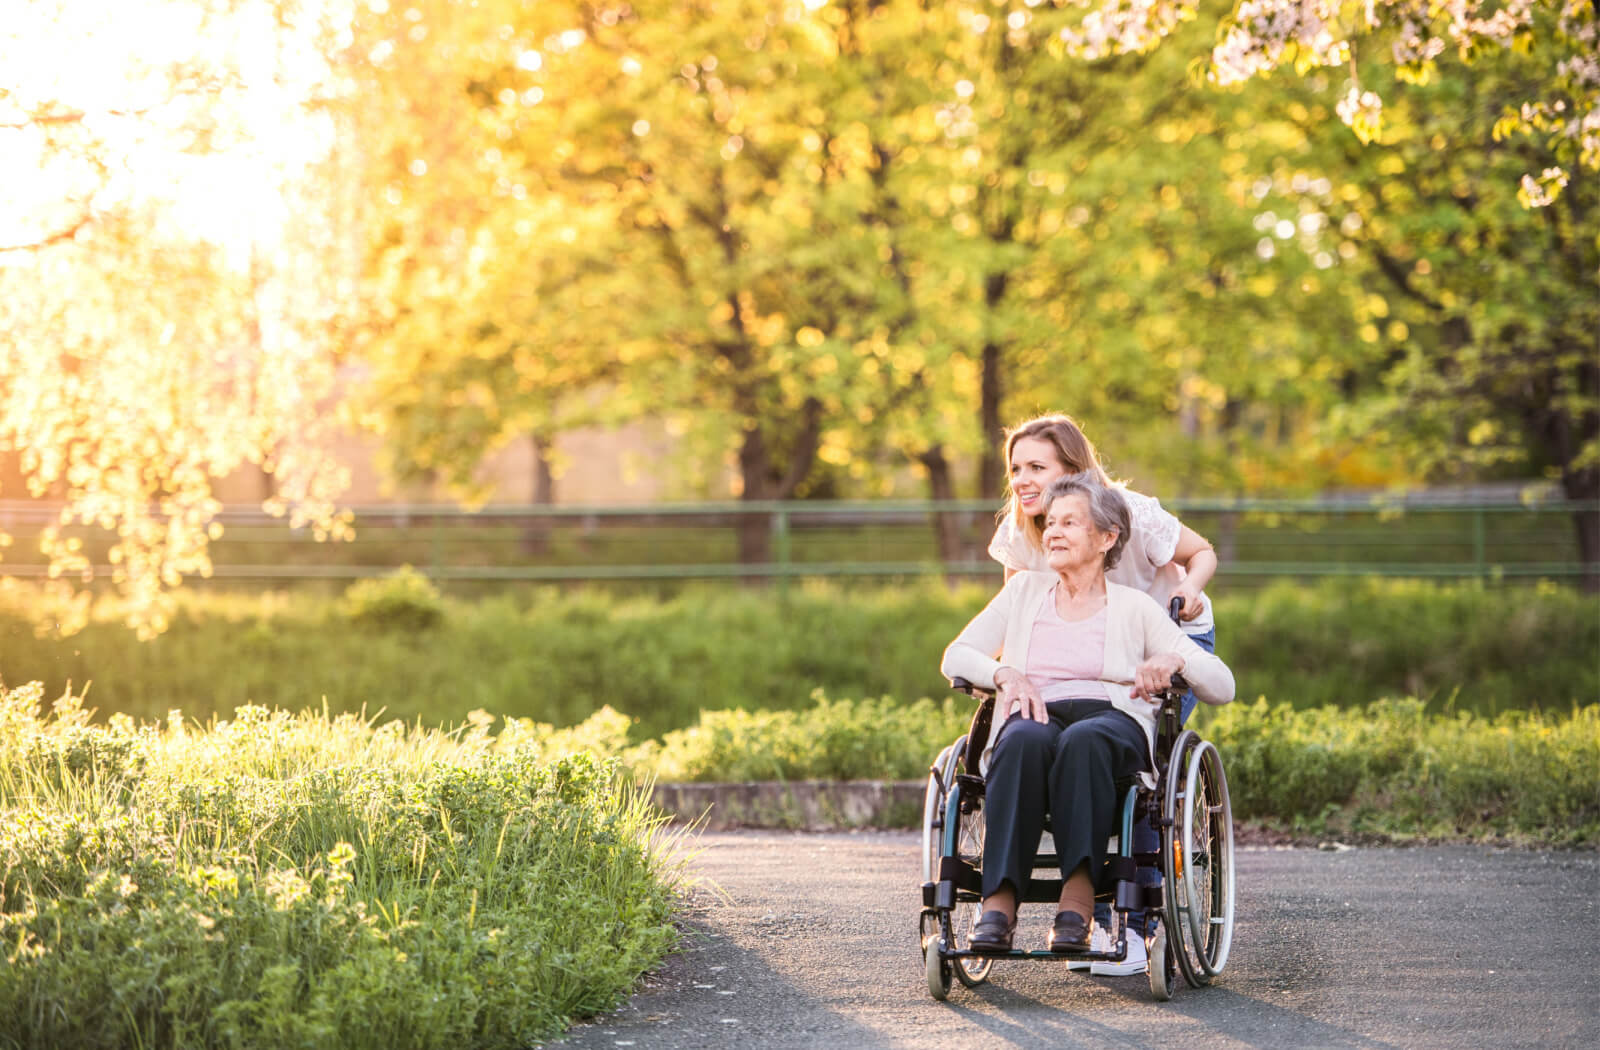 A young woman helping her mother in a wheelchair while having a nice time outside in a park.